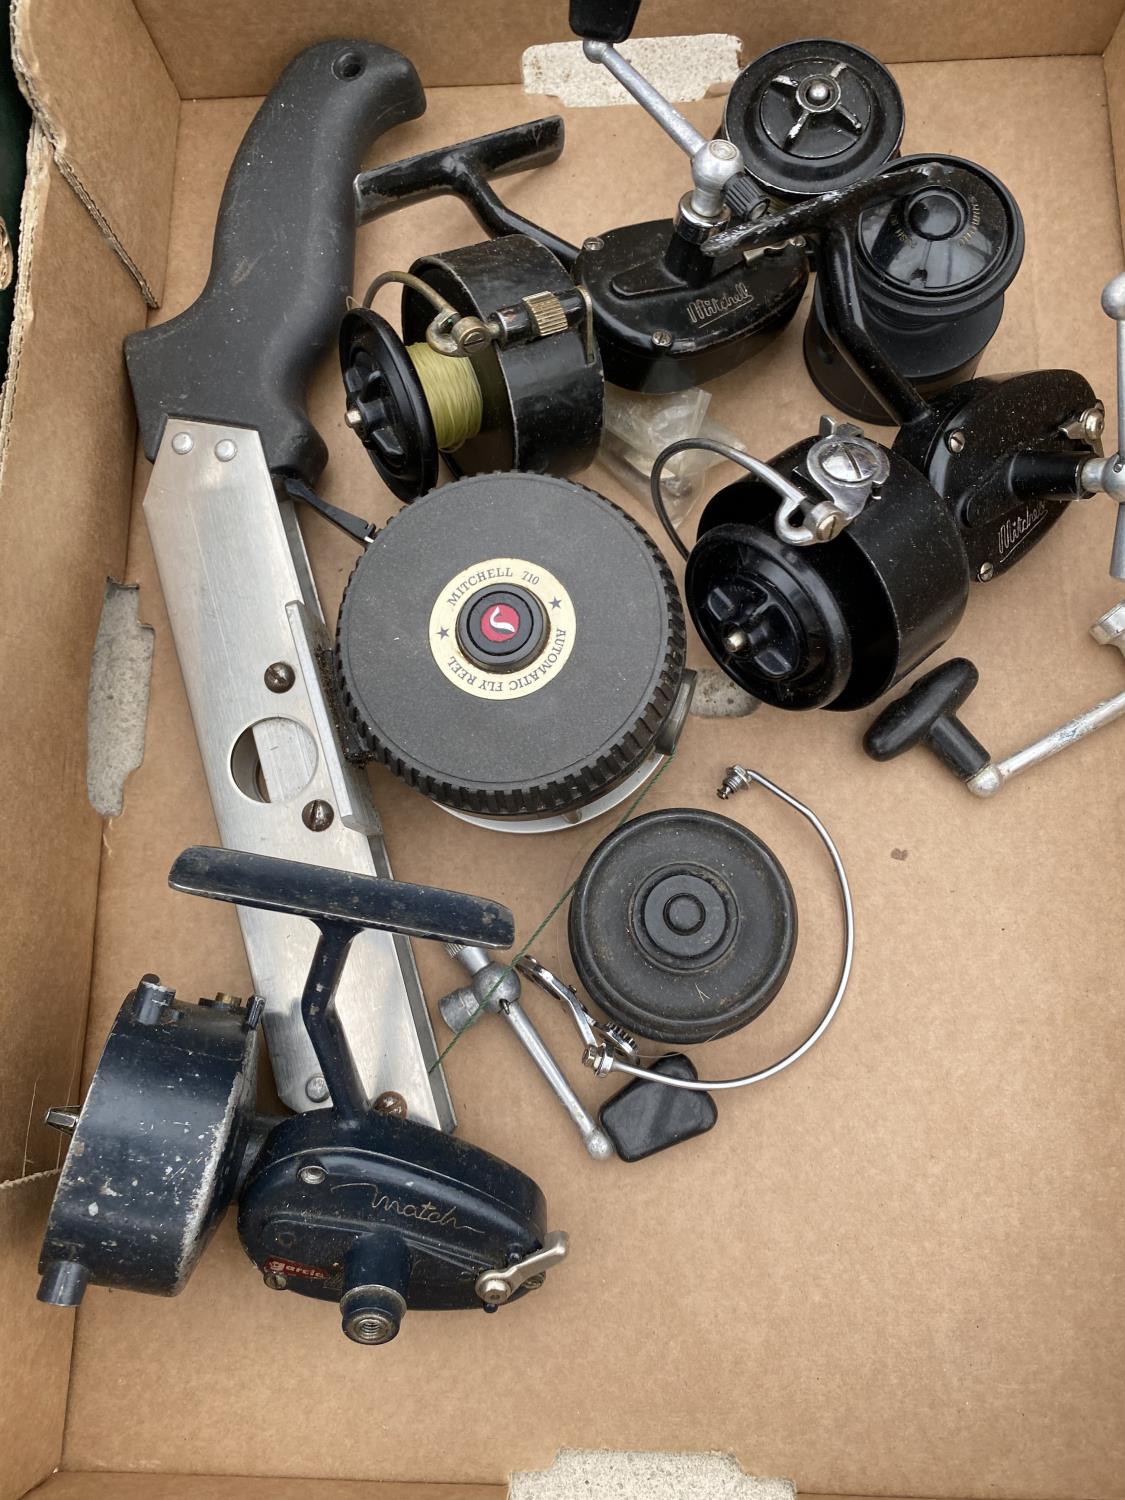 A MITCHELL 710 AUTOMATIC FLY REEL, A MITCHELL 300 REEL, 2 MITCHELL SPARE SPOOLS, A MITCHELL MATCH